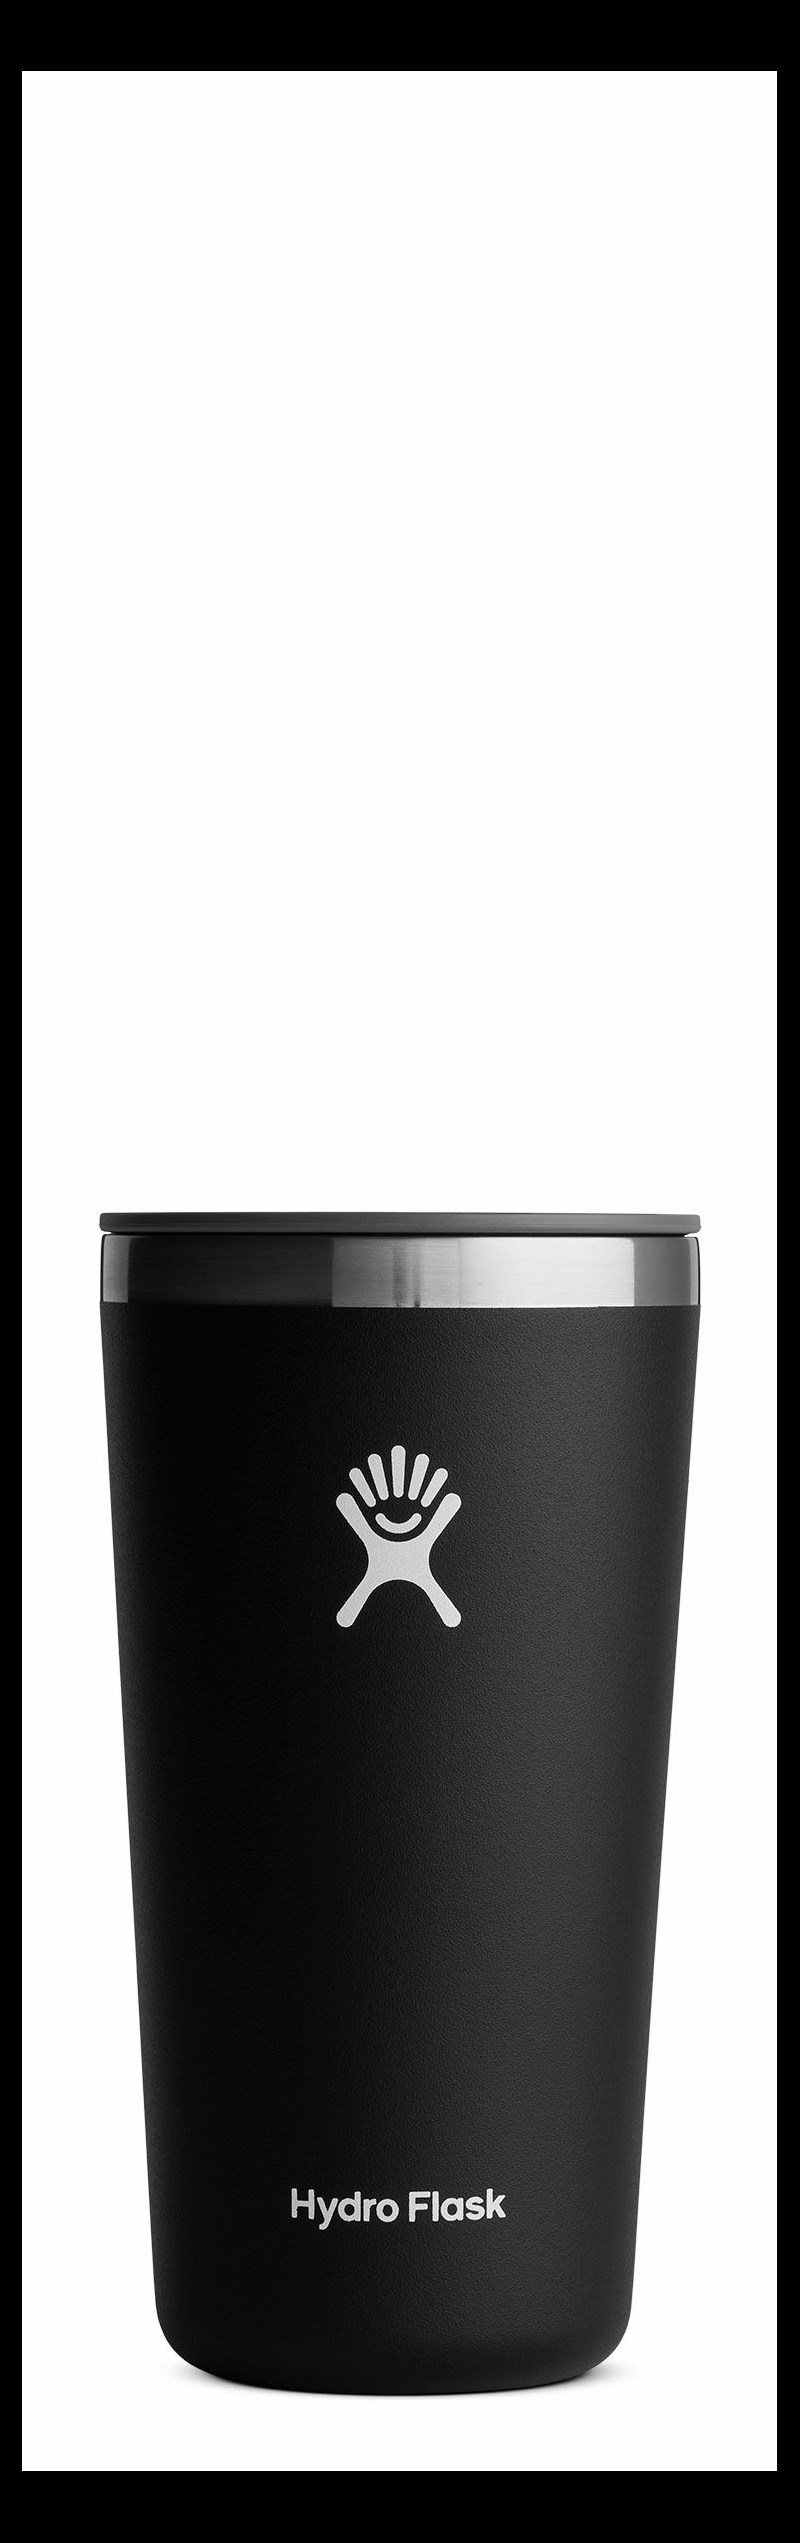 20-Oz All Around Tumbler in Black - Coolers & Hydration, Hydro Flask